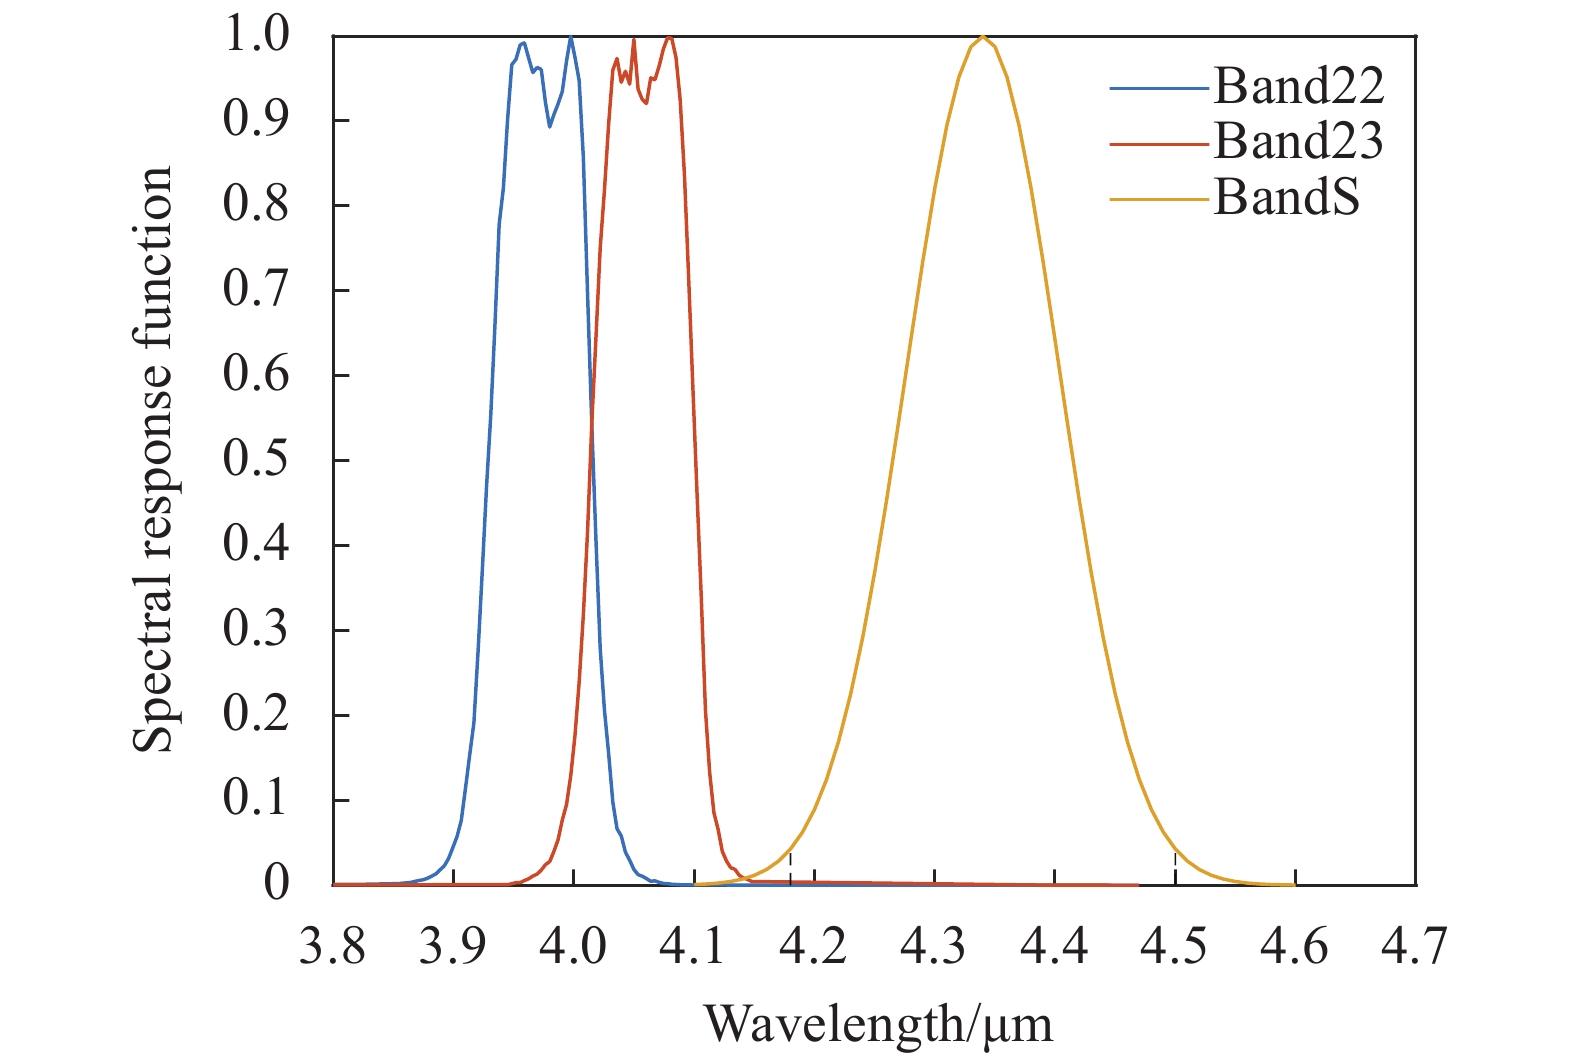 Spectral response functions of Band22, Band23 and BandS